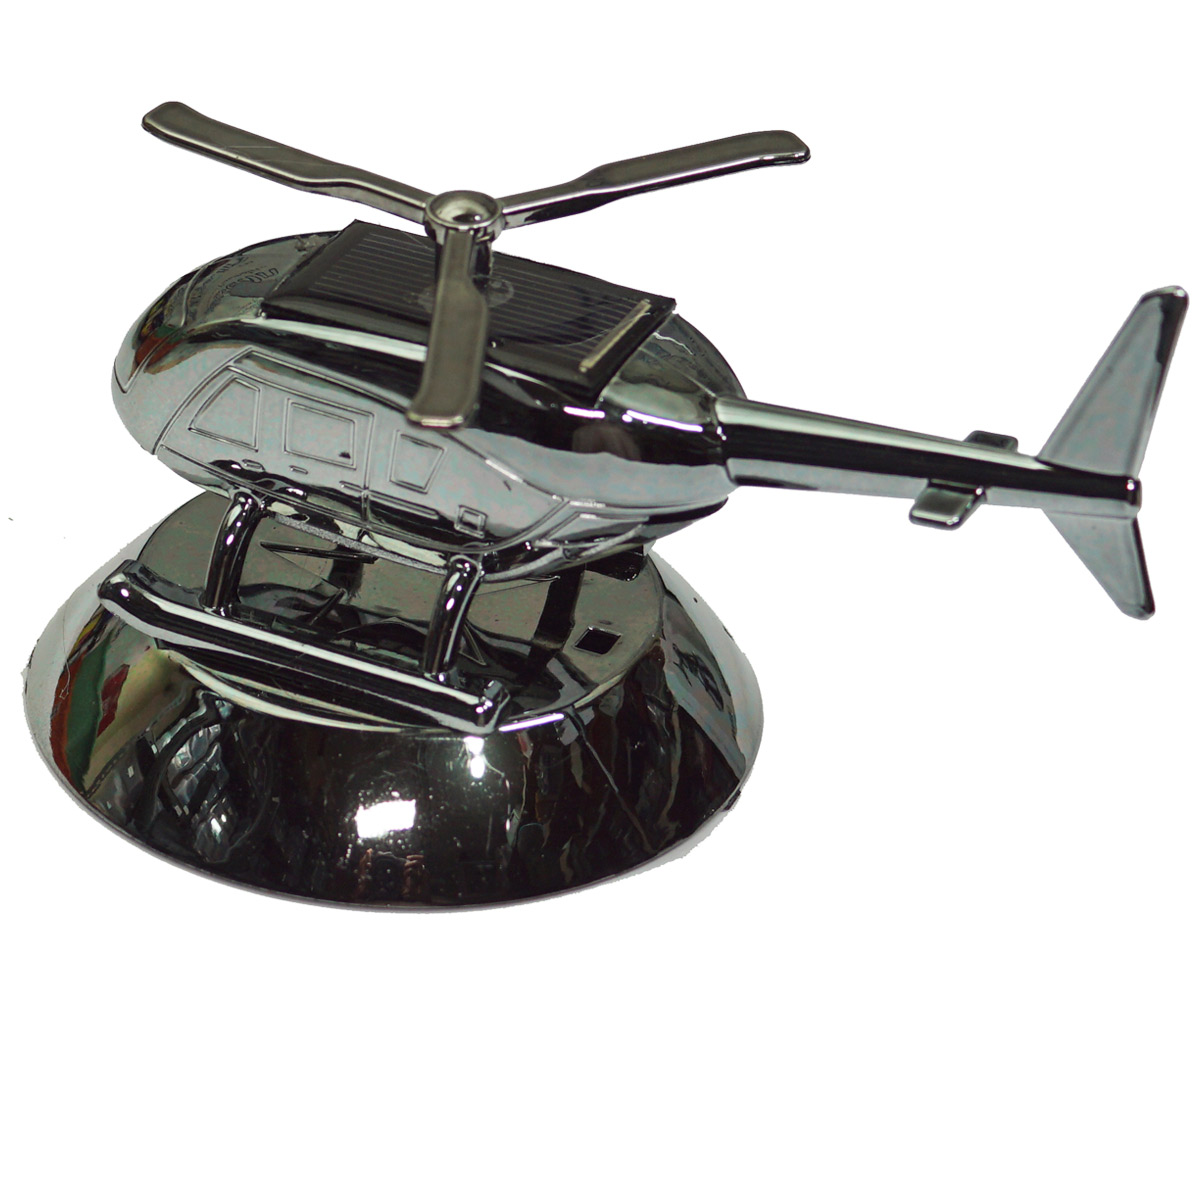 penhouse.in Glossy Grey Color Solar Powered Rotating Helicopter Car Air Freshner Perfume SKU 96516